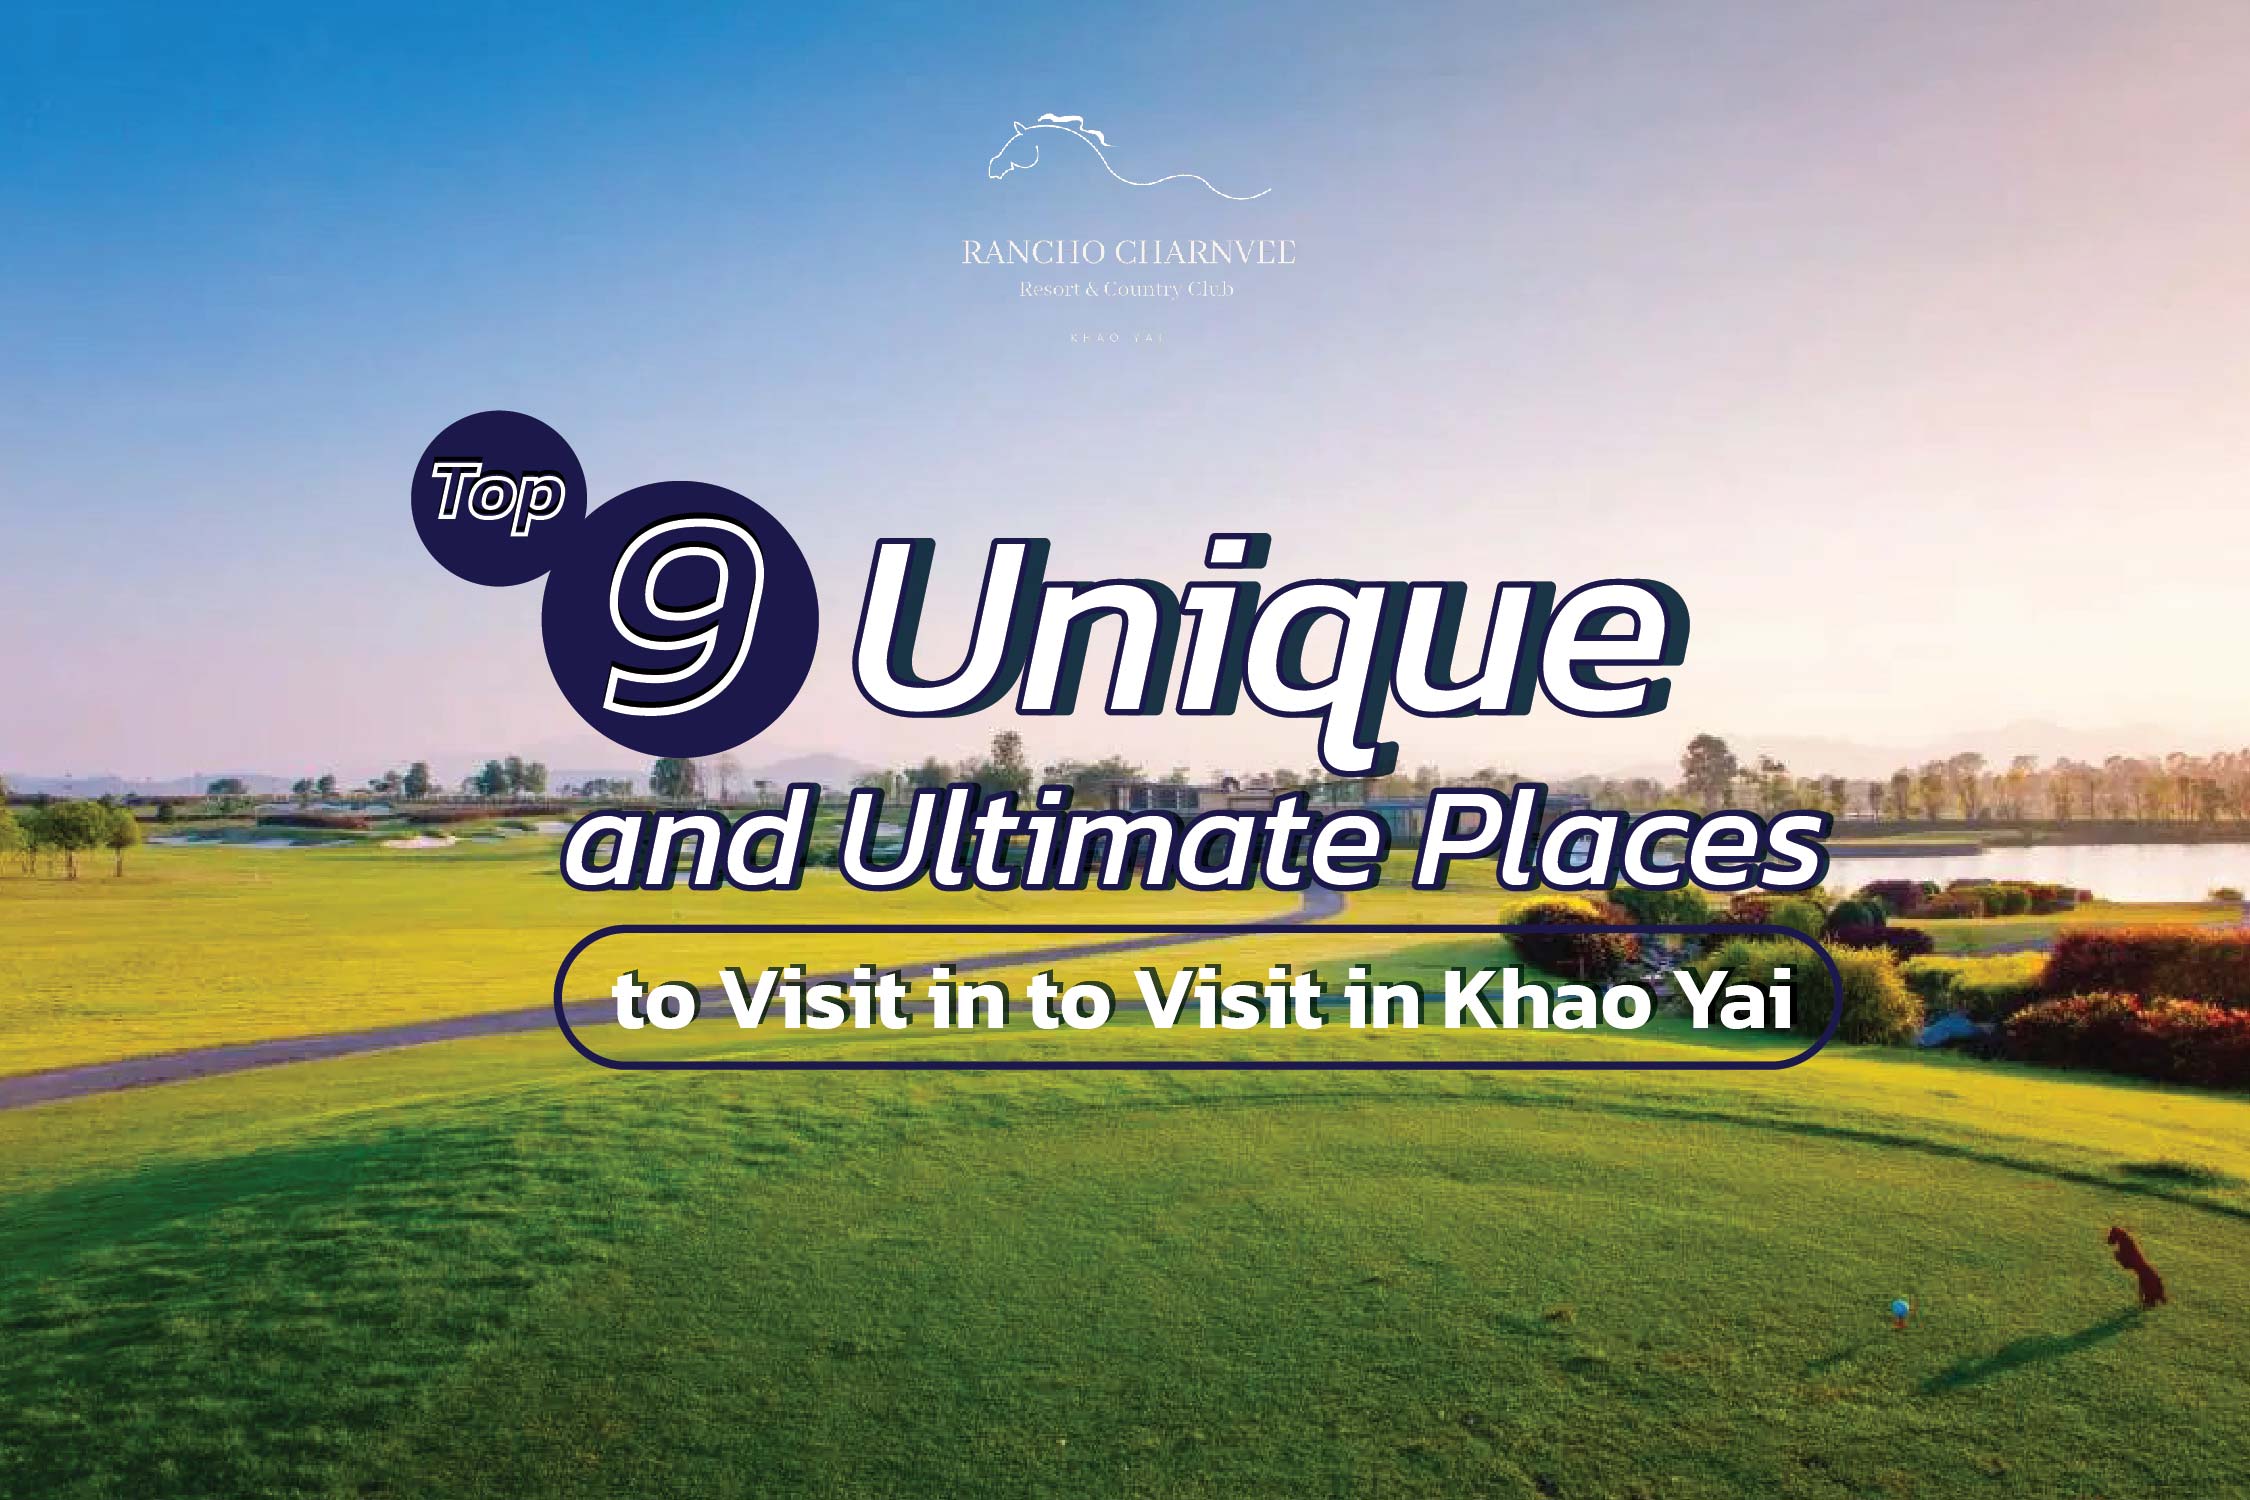 Top 9 Unique and Ultimate Places to Visit in Khao Yai